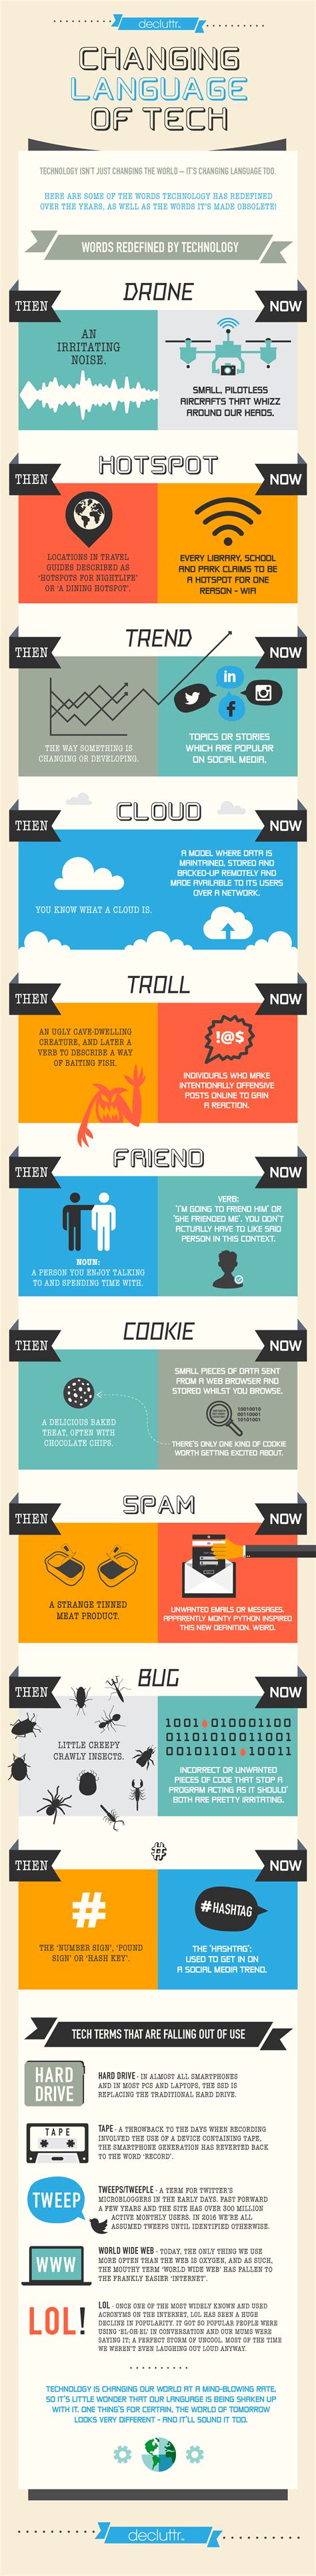 How Technology Has Changed Our Language Infographic